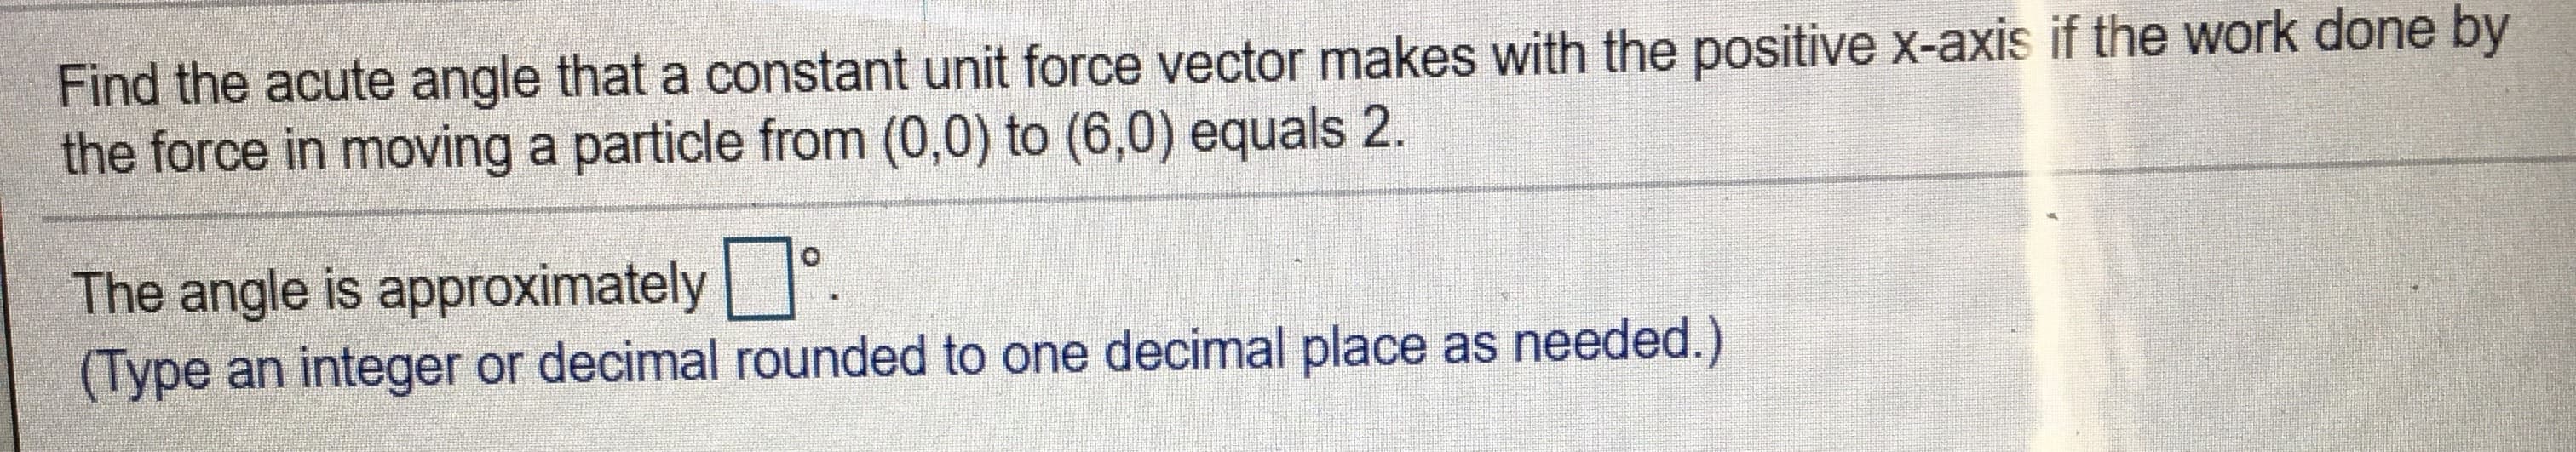 Find the acute angle that a constant unit force vector makes with the positive x-axis if the work done by
the force in moving a particle from (0,0) to (6,0) equals 2.
The angle is approximately °.
(Type an integer or decimal rounded to one decimal place as needed.)
